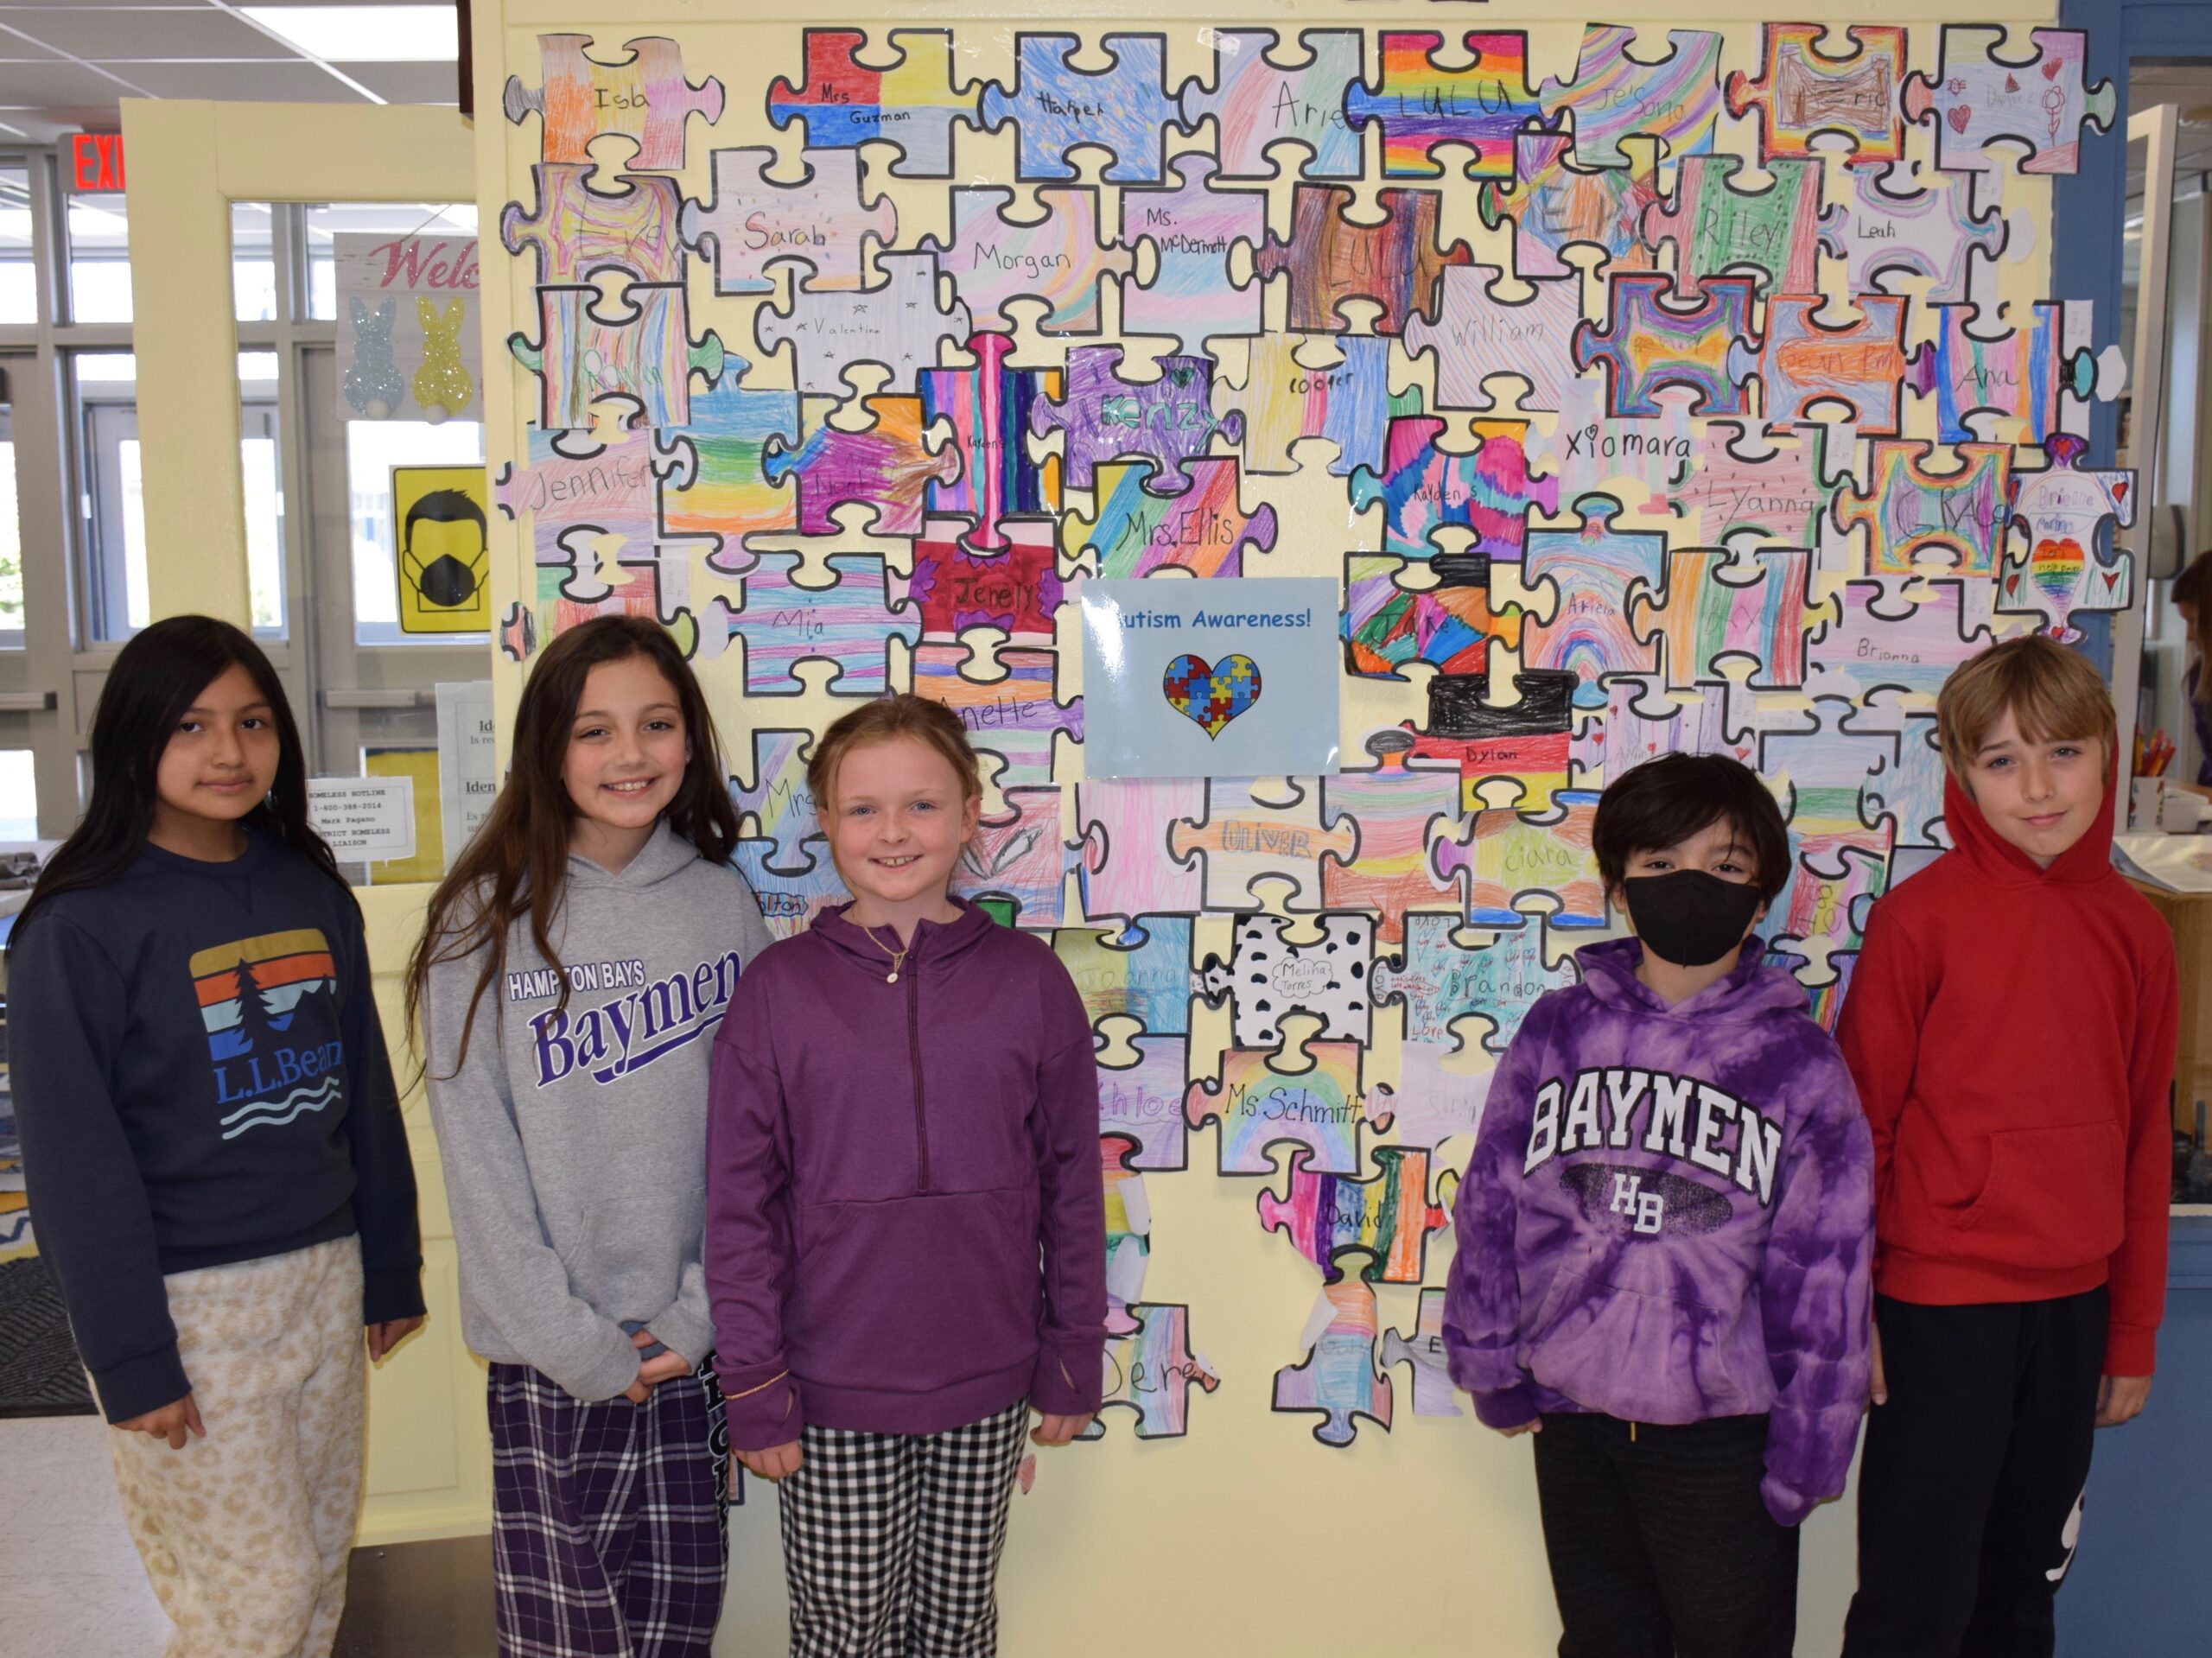 Members of Hampton Bays Elementary School’s service club, K-Kids, raised $200 for the Anderson Center for Autism as part of an annual autism awareness fundraiser. They raised the funds by hosting a pajama day in which students and staff donated money to wear pajamas to school on April 29. The fundraiser is just one of many the K-Kids have hosted this school year. From left, Kelly Guanga, Samantha Betta, Maeve Kelly, Diego Bedoya and Kai Summar. COURTESY HAMPTON BAYS SCHOOL DISTRICT